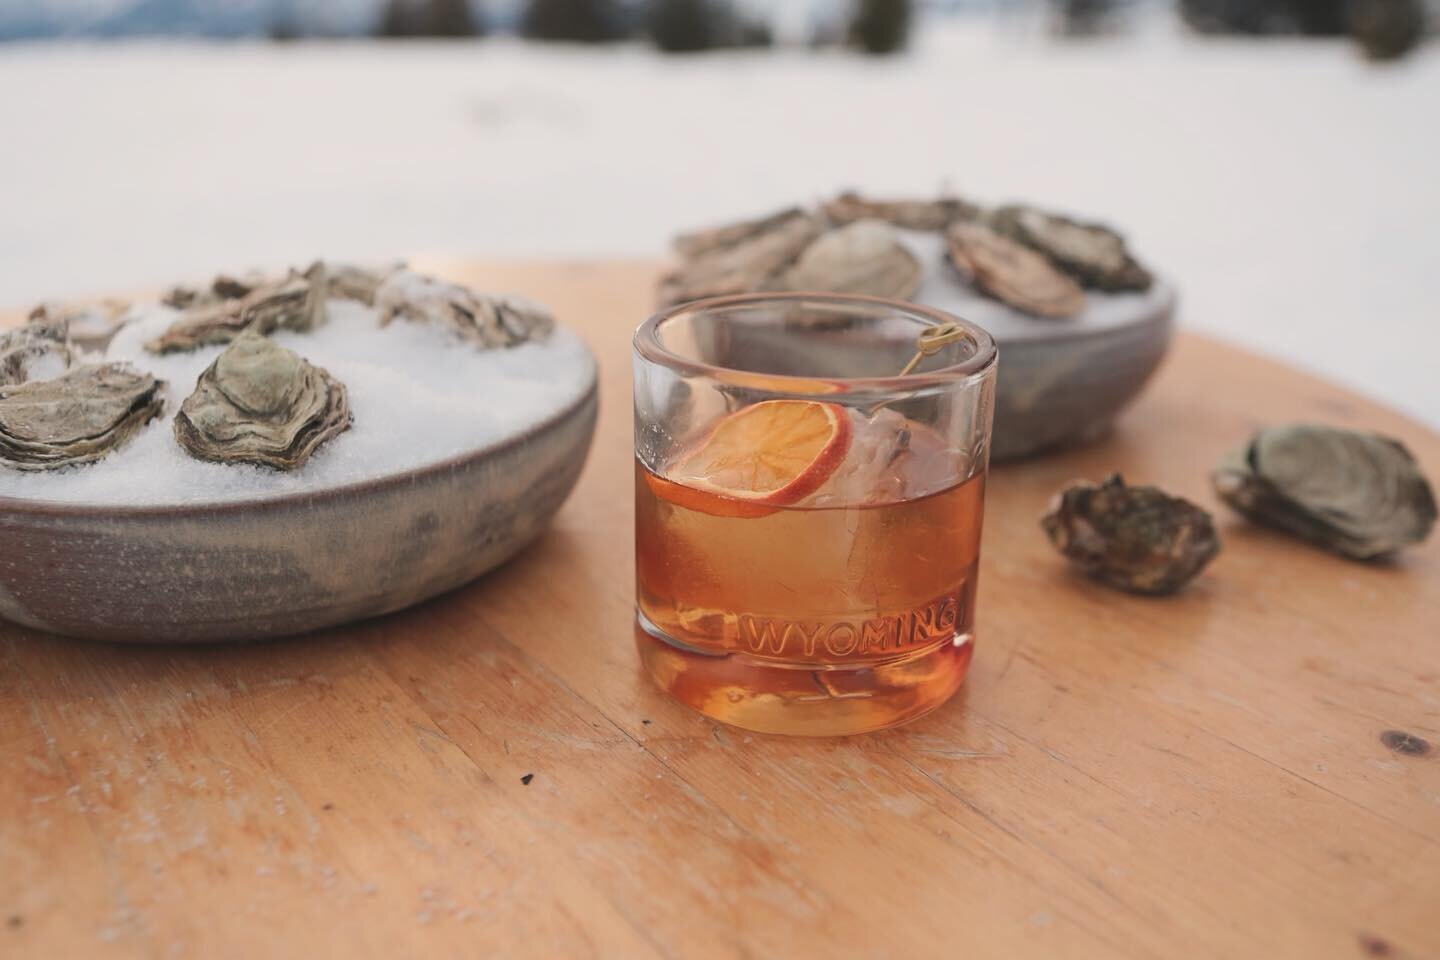 Wyoming Whiskey Old Fashions help hold off the cold during theses winter days! Link in bio 

www.jhoutfittingcompany.con

📸 credit: @saraligon 

#whisky #wyoming #cocktails #authentic #farmtotable #local #vacation #bucketlist #best #wyomingwhiskey #